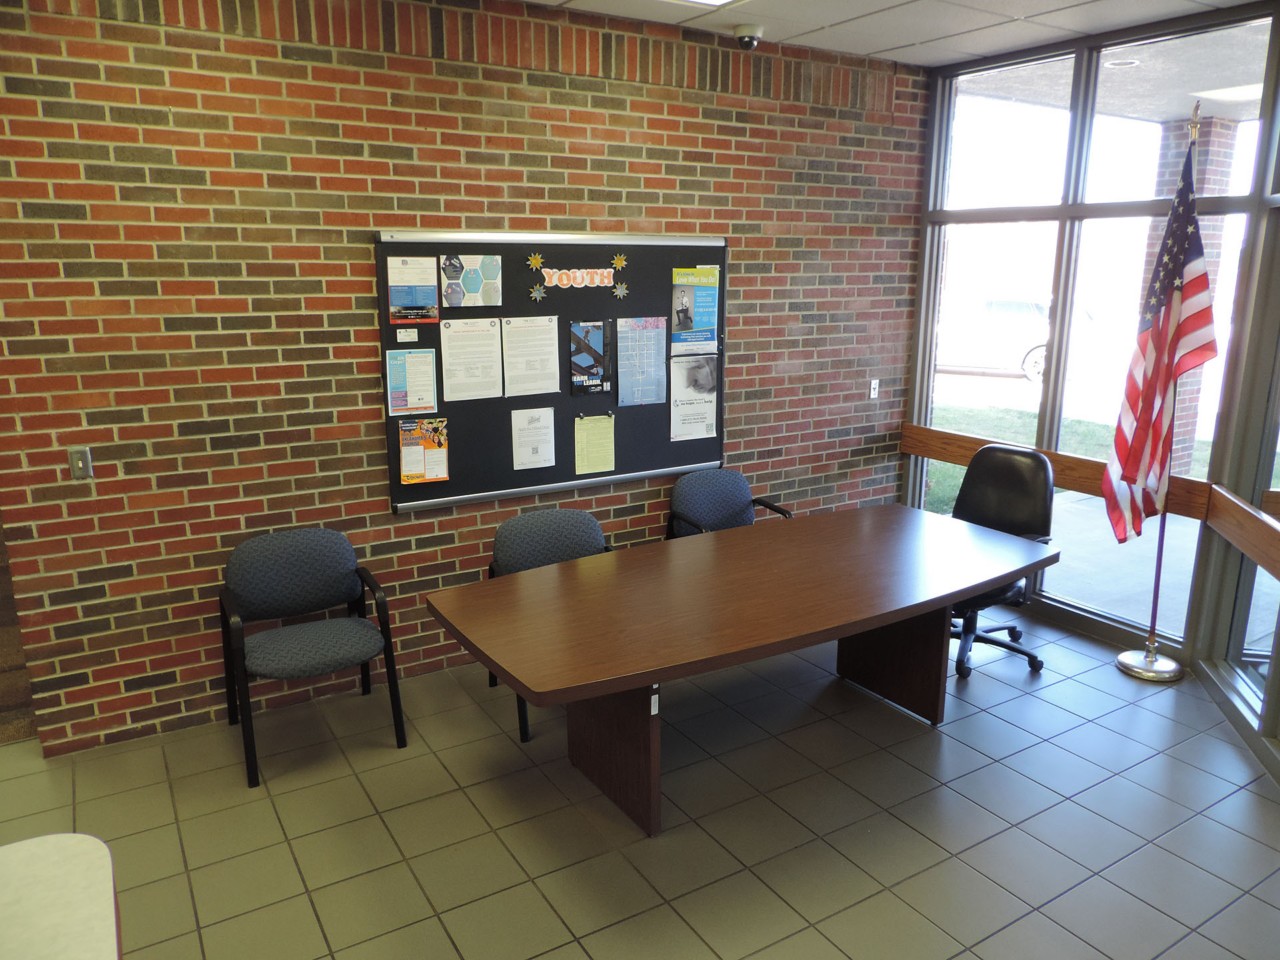 Waiting area available to public after checking in at front desk when waiting for appointment or training/resources to become available.